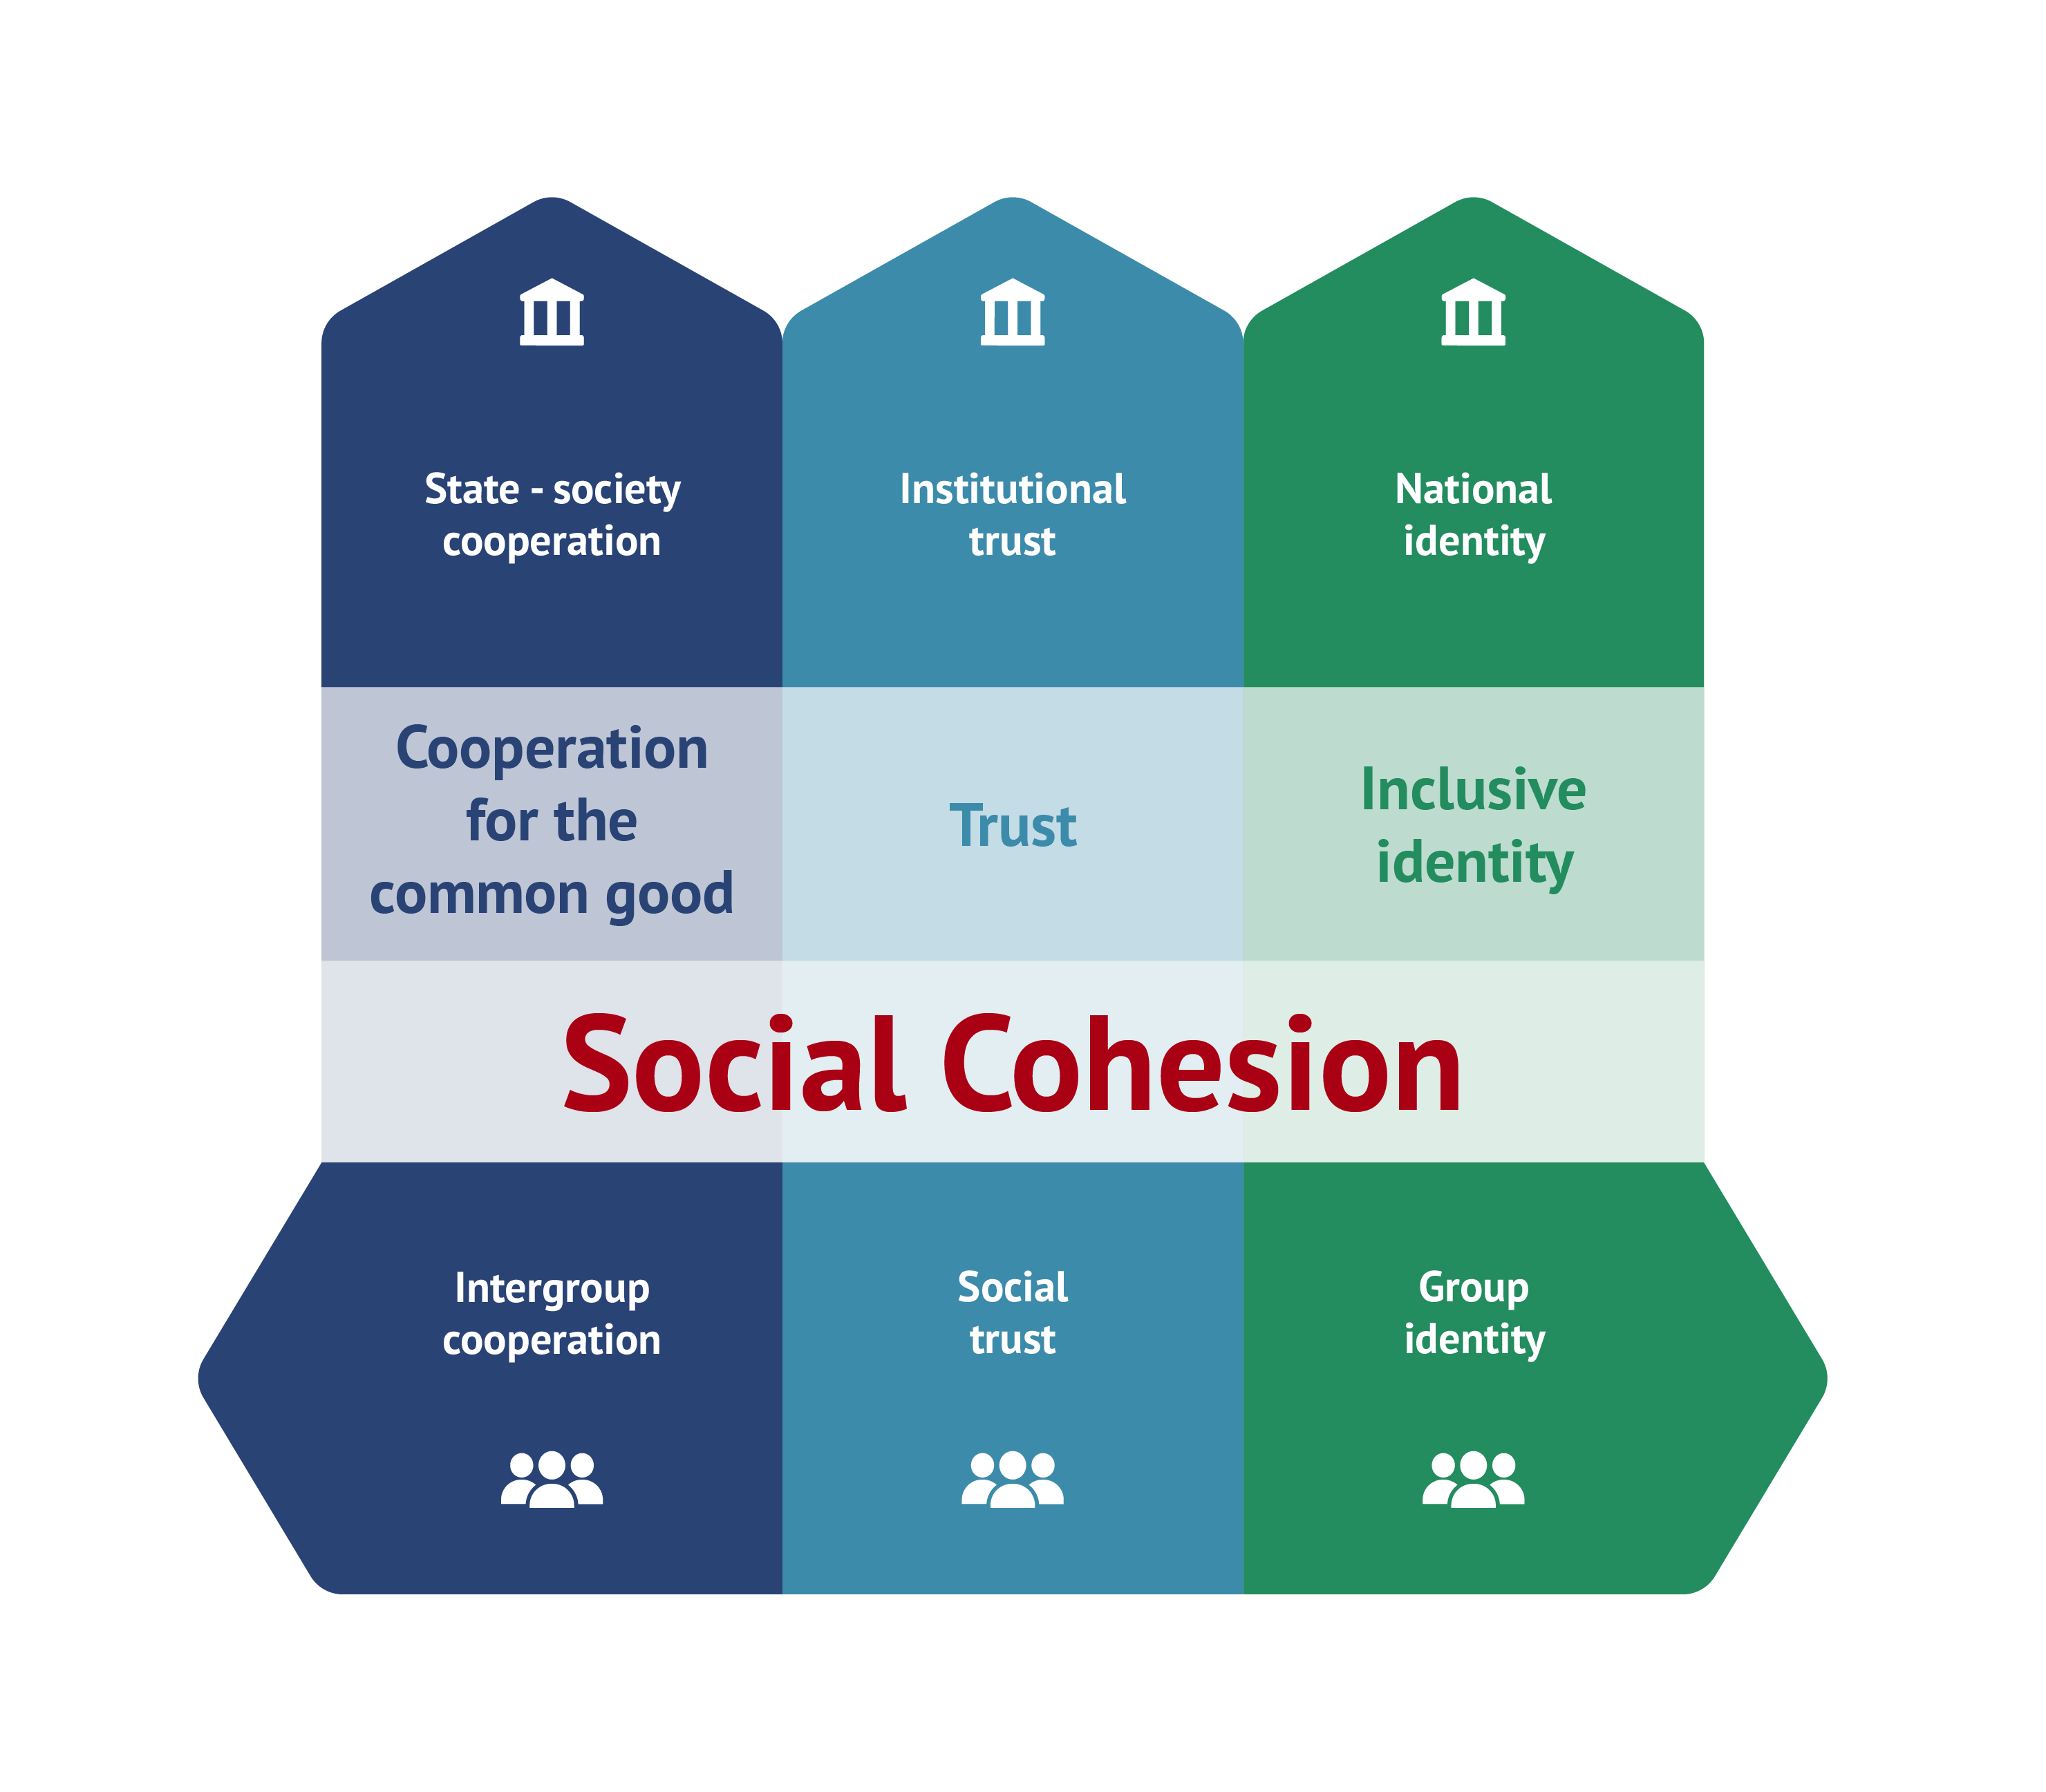 DIE's Concept of Social Cohesion